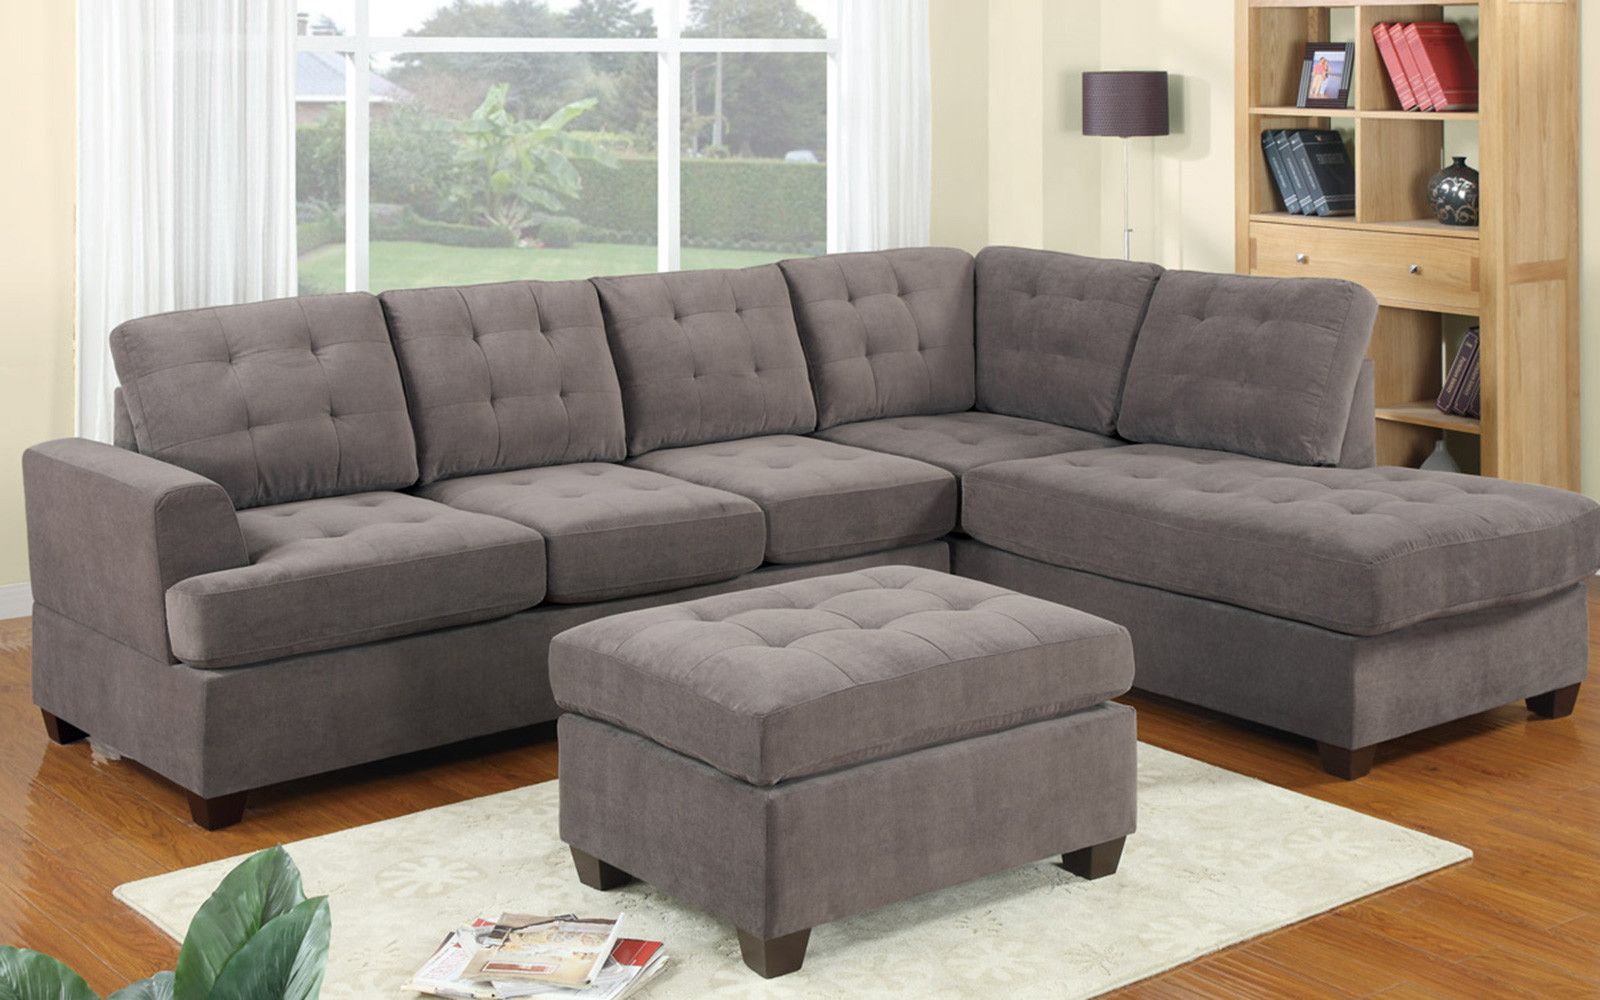 The Beauty Of Microfiber Sectional Sofa – Decorifusta Inside Microfiber Sectional Corner Sofas (Gallery 10 of 20)